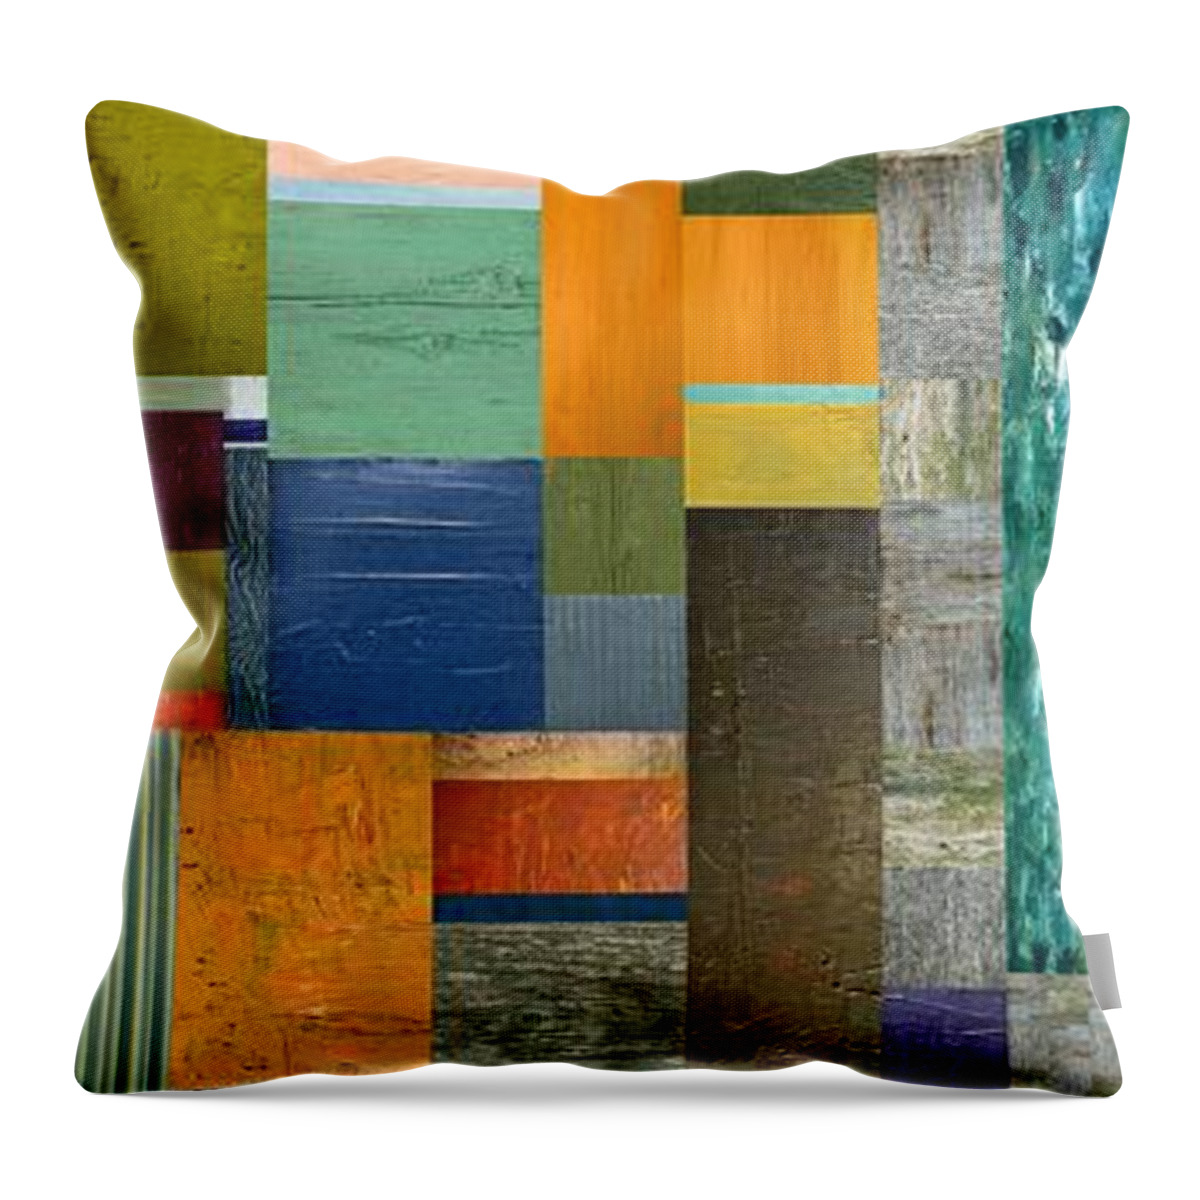 Multicolored Throw Pillow featuring the painting Pieces Parts V by Michelle Calkins